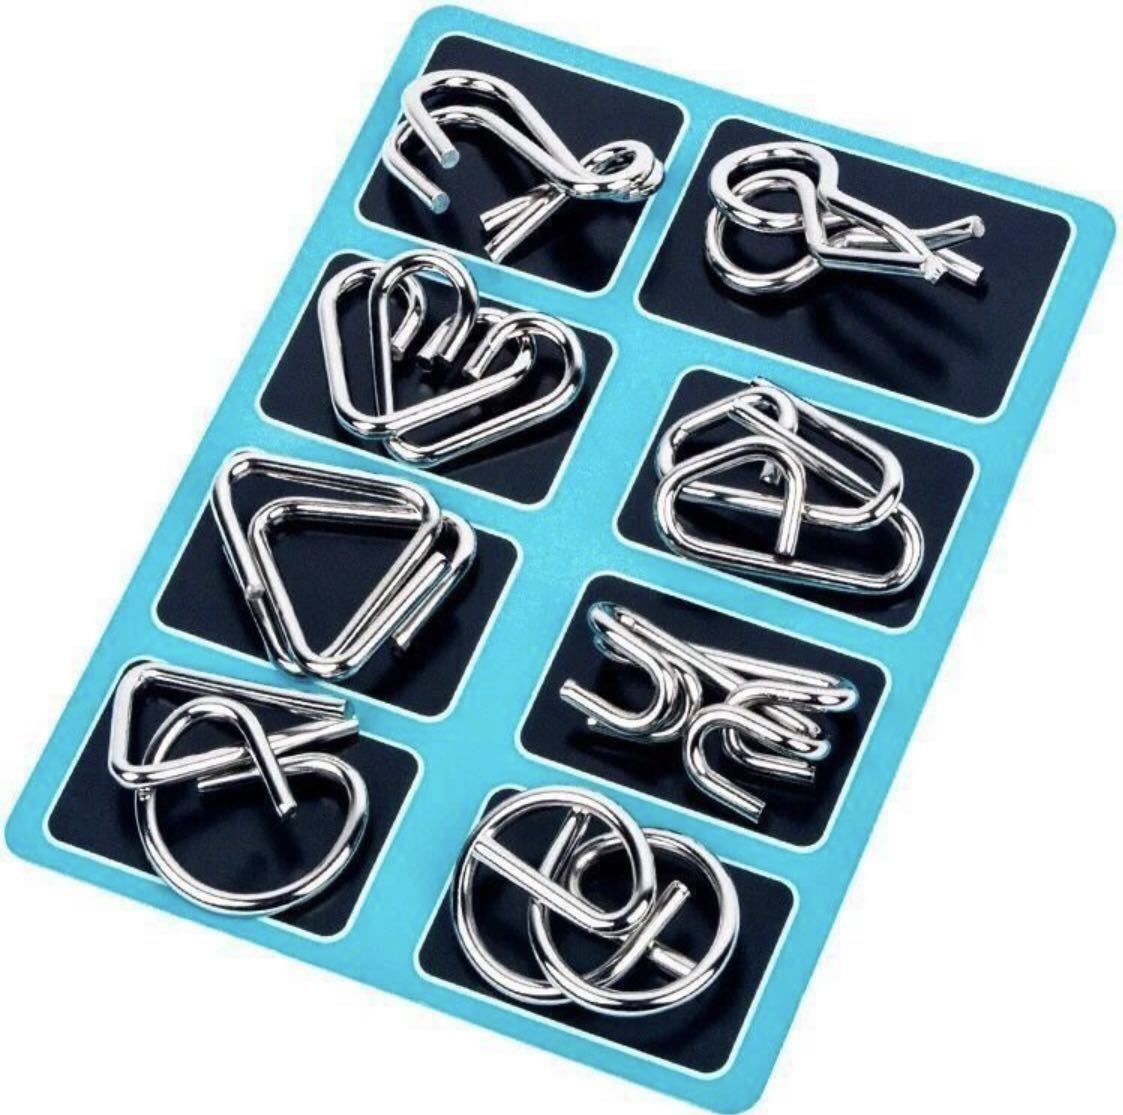  puzzle rings 8 point set toy intellectual training .tore puzzle game mystery ring ring intellectual training toy intellectual training mystery game silver 